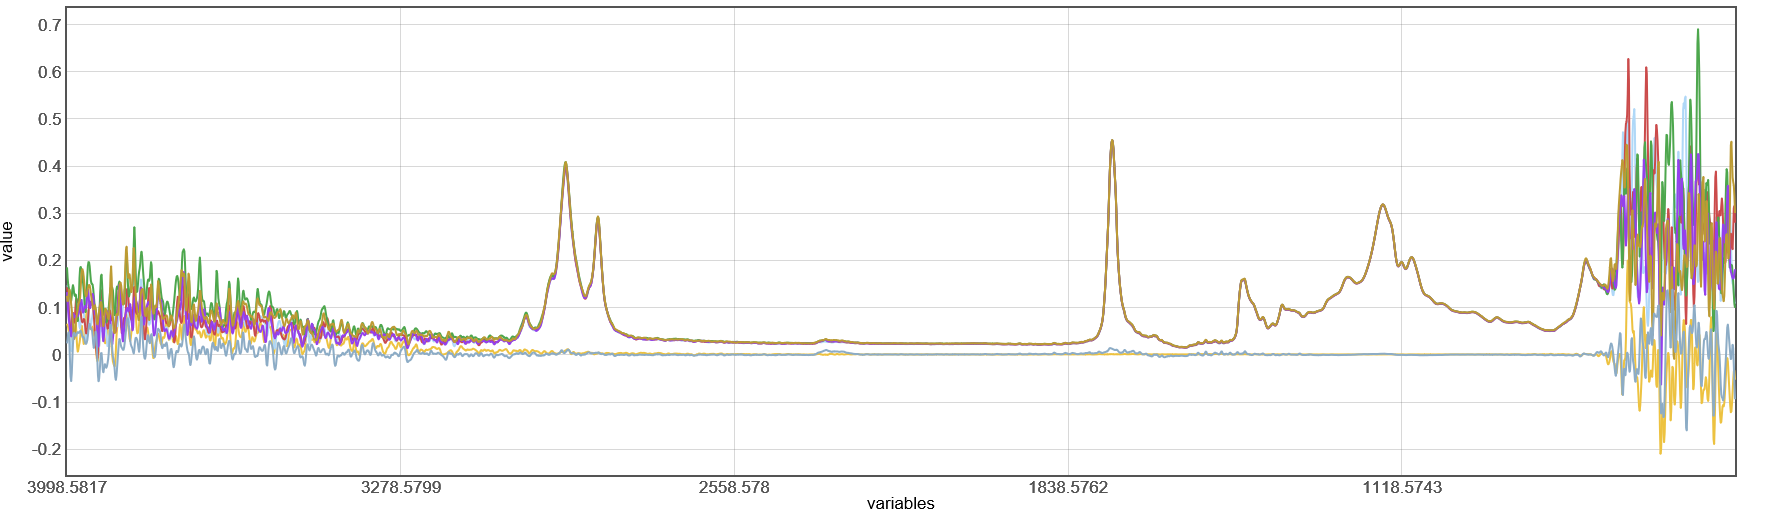 ATR IR spectra of pumpkin seed oil - 4 cm-1, 4 scans. Spectra acquired using FT-IR Matrix spectrometer by Bruker through a PIR fiber probe by art photonics at the resolution of 4 cm-1 and 4 scans.